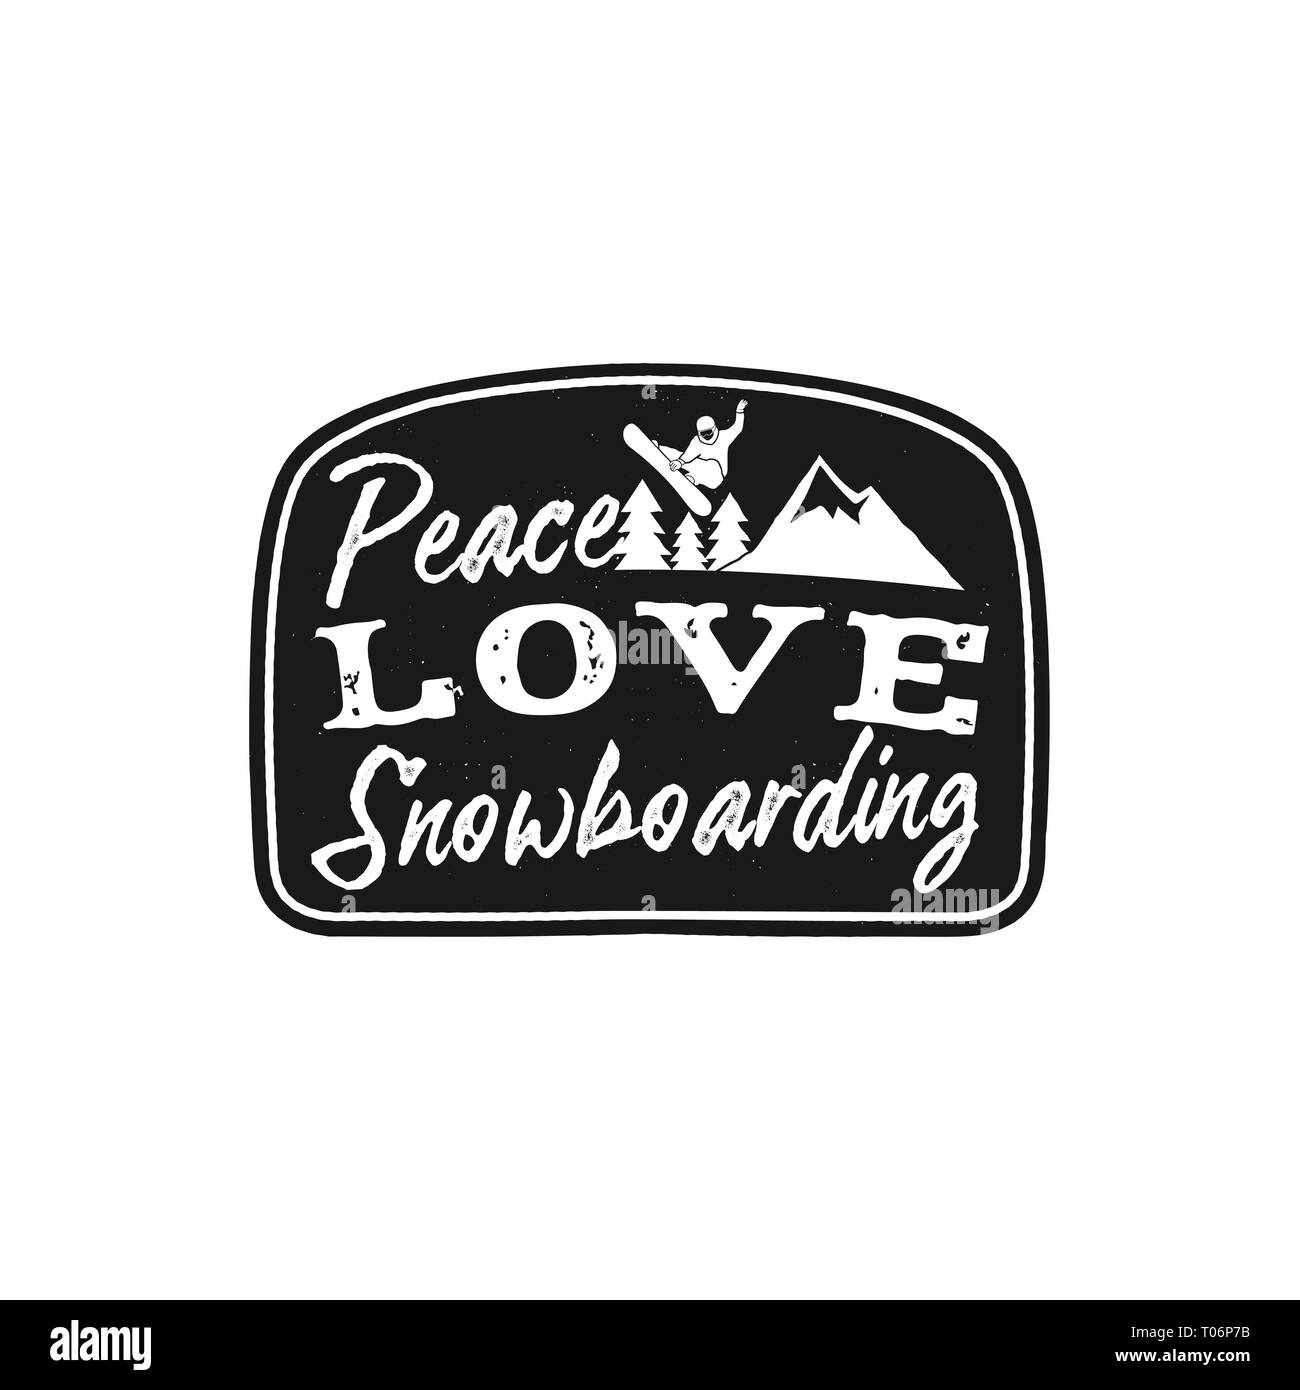 Snowboard retro logo with quote - Peace Love Snowboarding. Mountain Explorer Badge. Camping adventure emblem, monochrome. Features snowboarder jumping Stock Vector